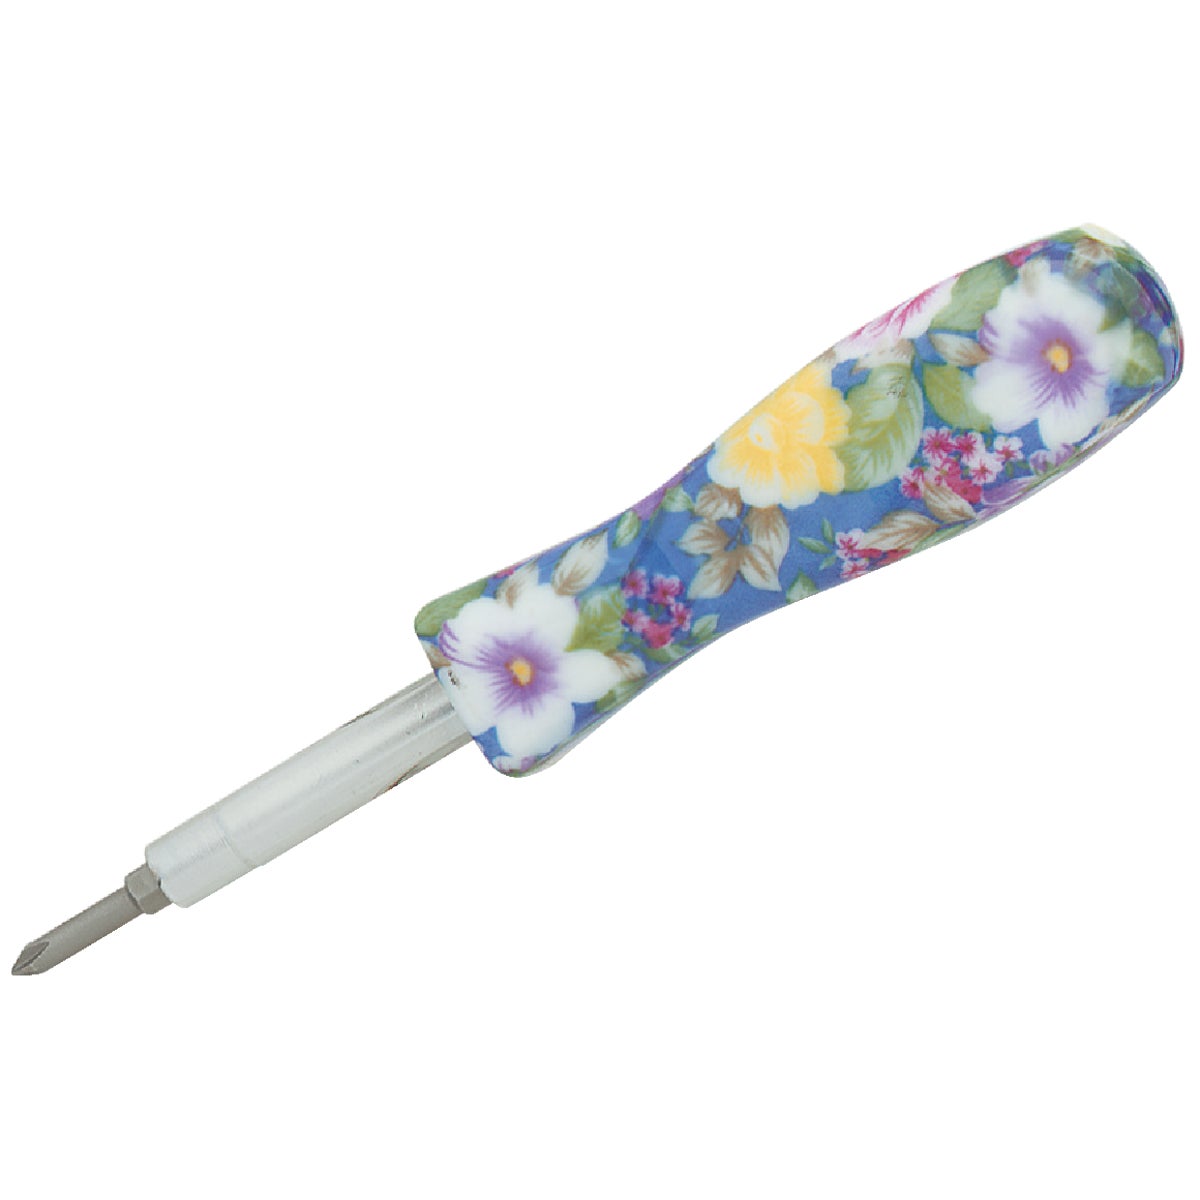 Item 320579, Flowered pattern handle with double-ended chrome-plated tube.